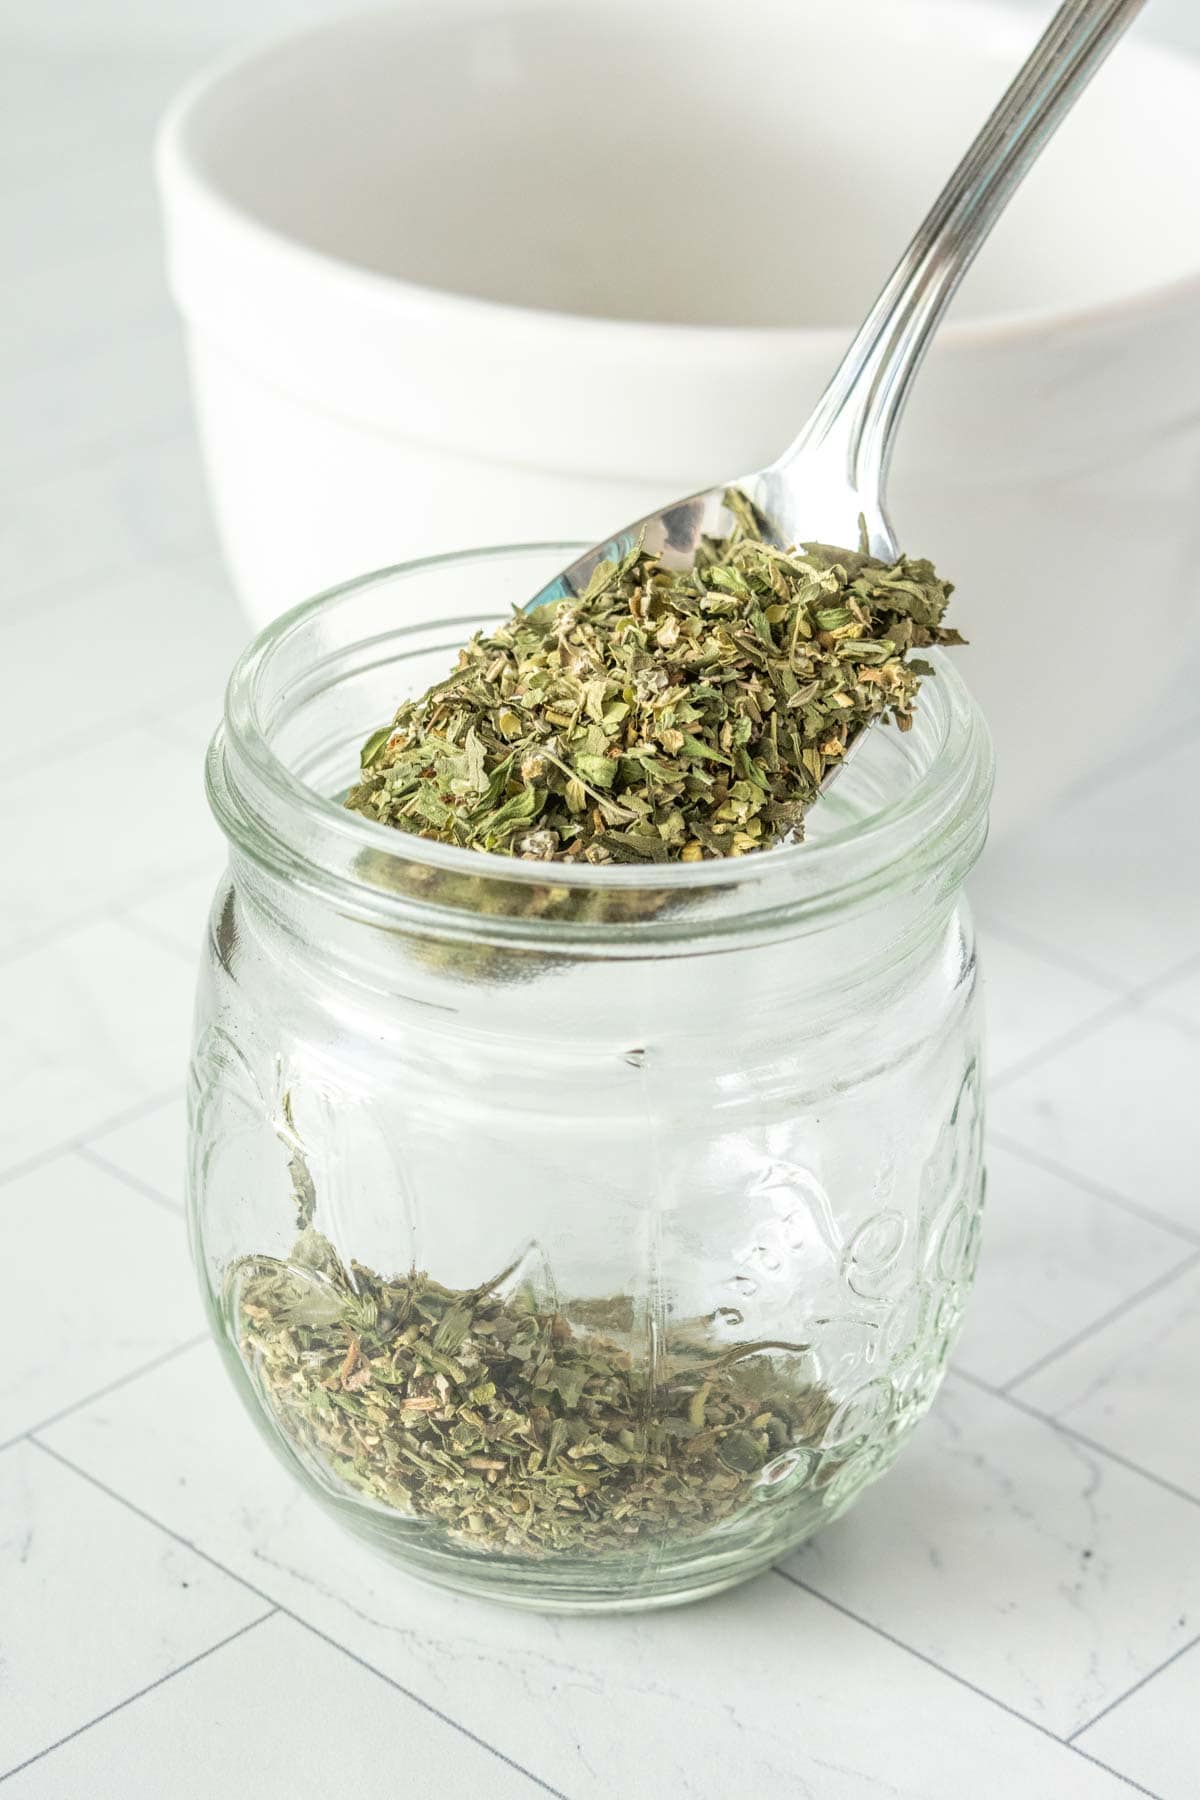 A spoonful of herbs in a glass jar.